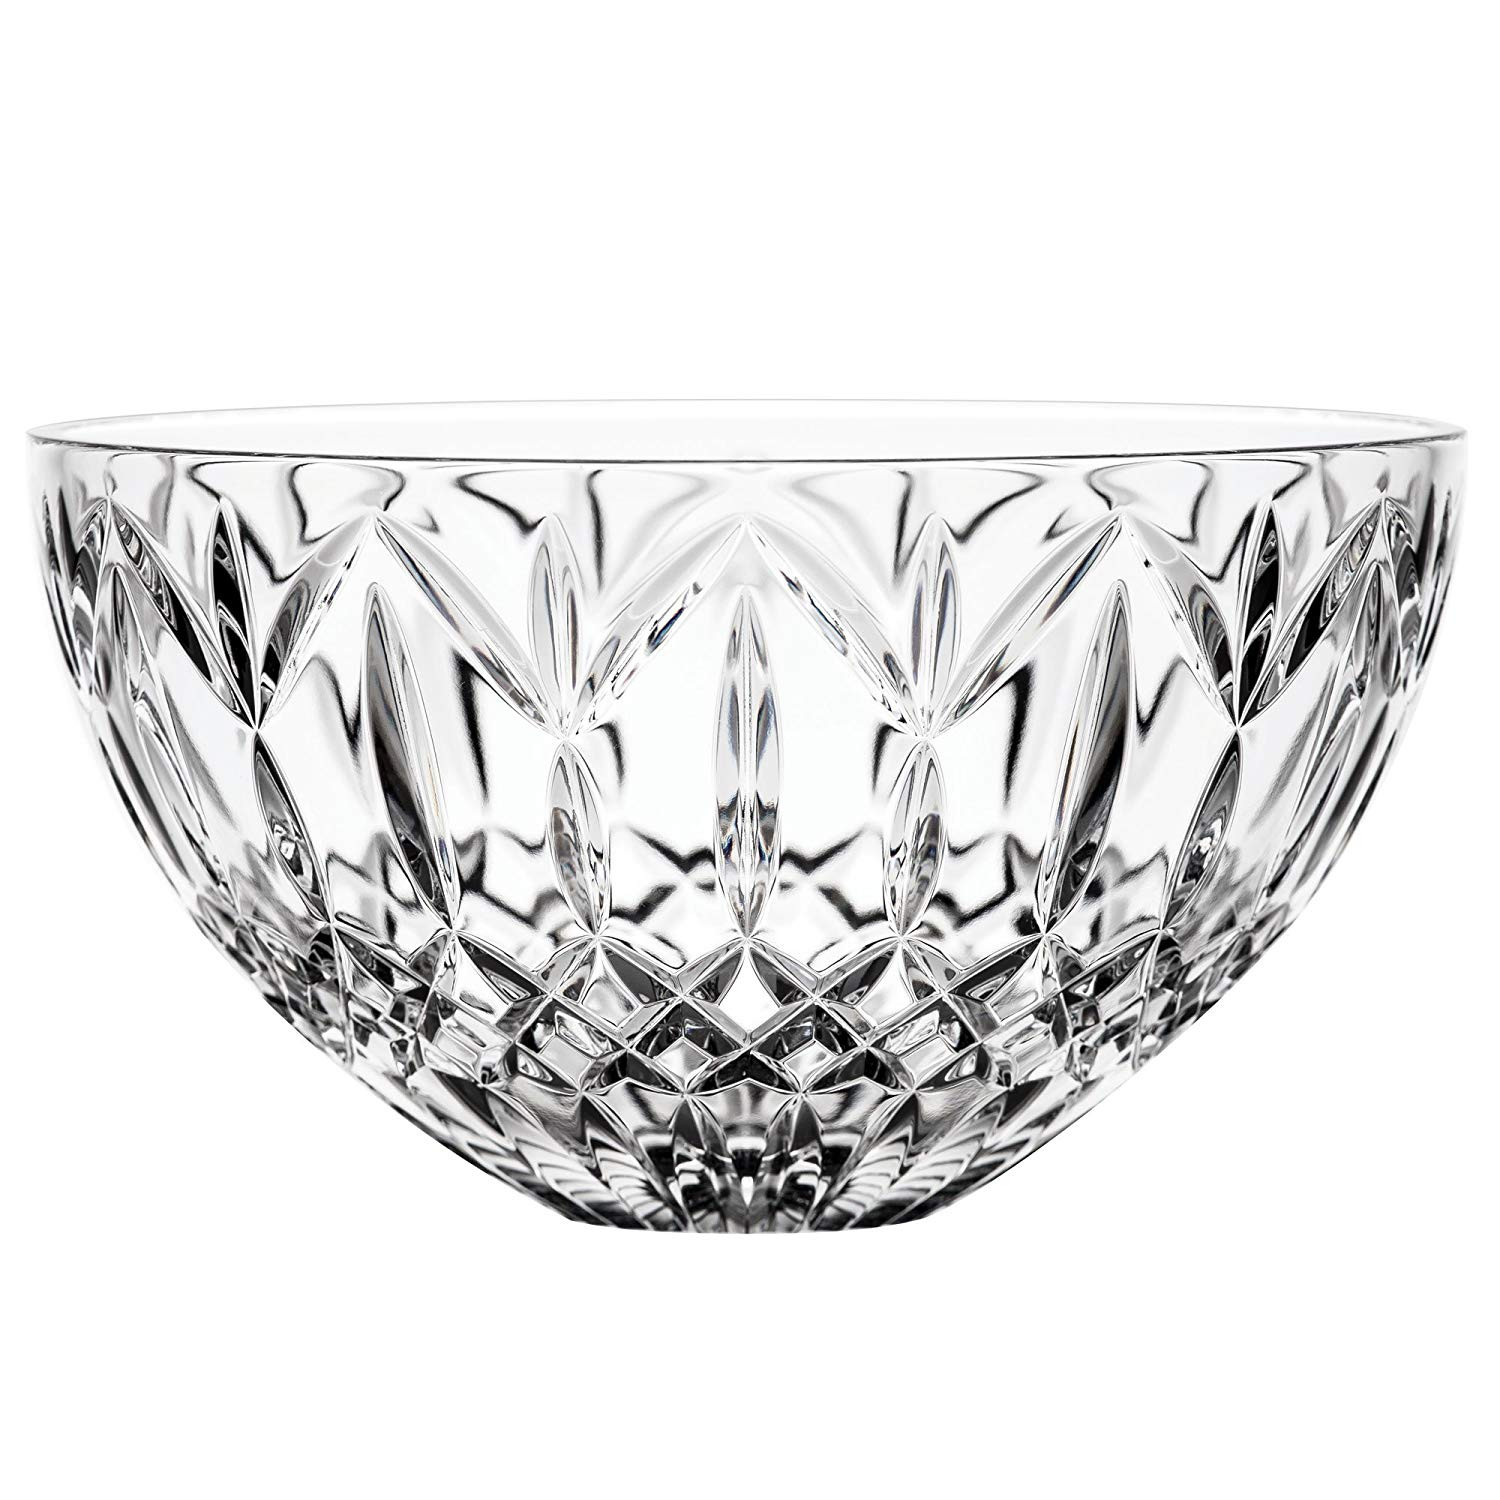 25 Spectacular Waterford Lismore Diamond 8 Vase 2024 free download waterford lismore diamond 8 vase of amazon com waterford crystal heritage bowl 8 home kitchen with 81swsb afil sl1500